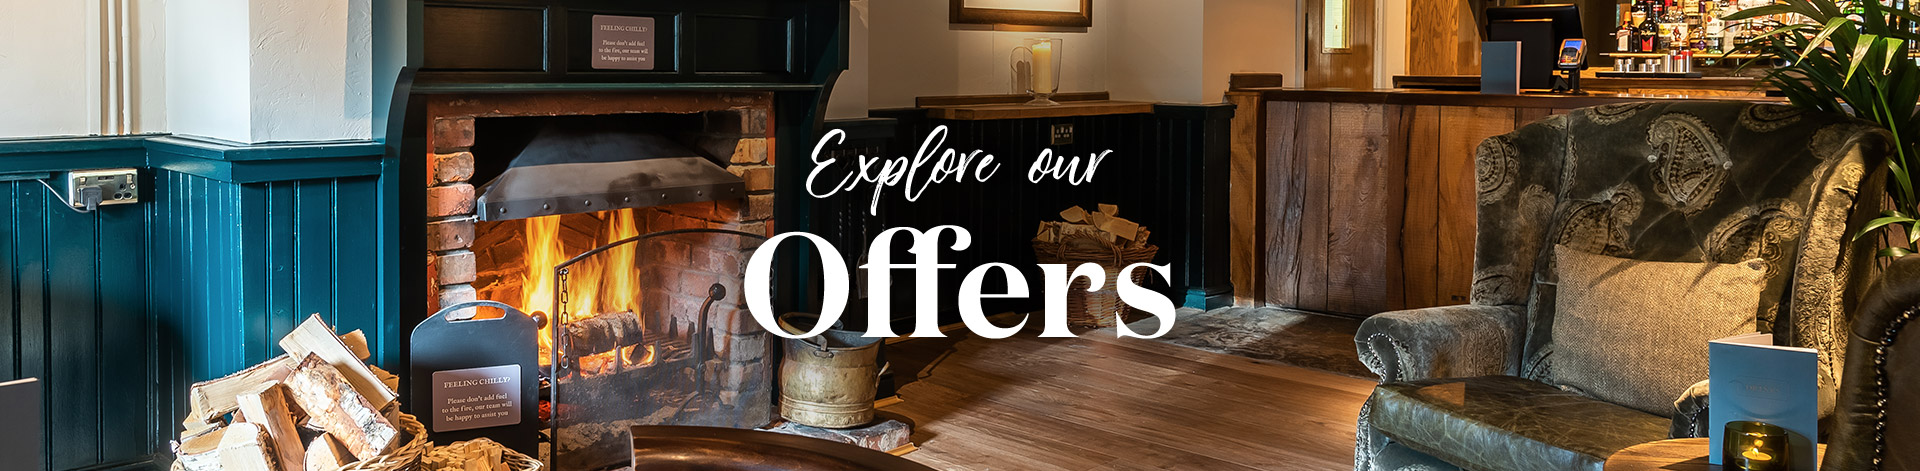 Our latest offers at The Traveller's Rest, Caerphilly